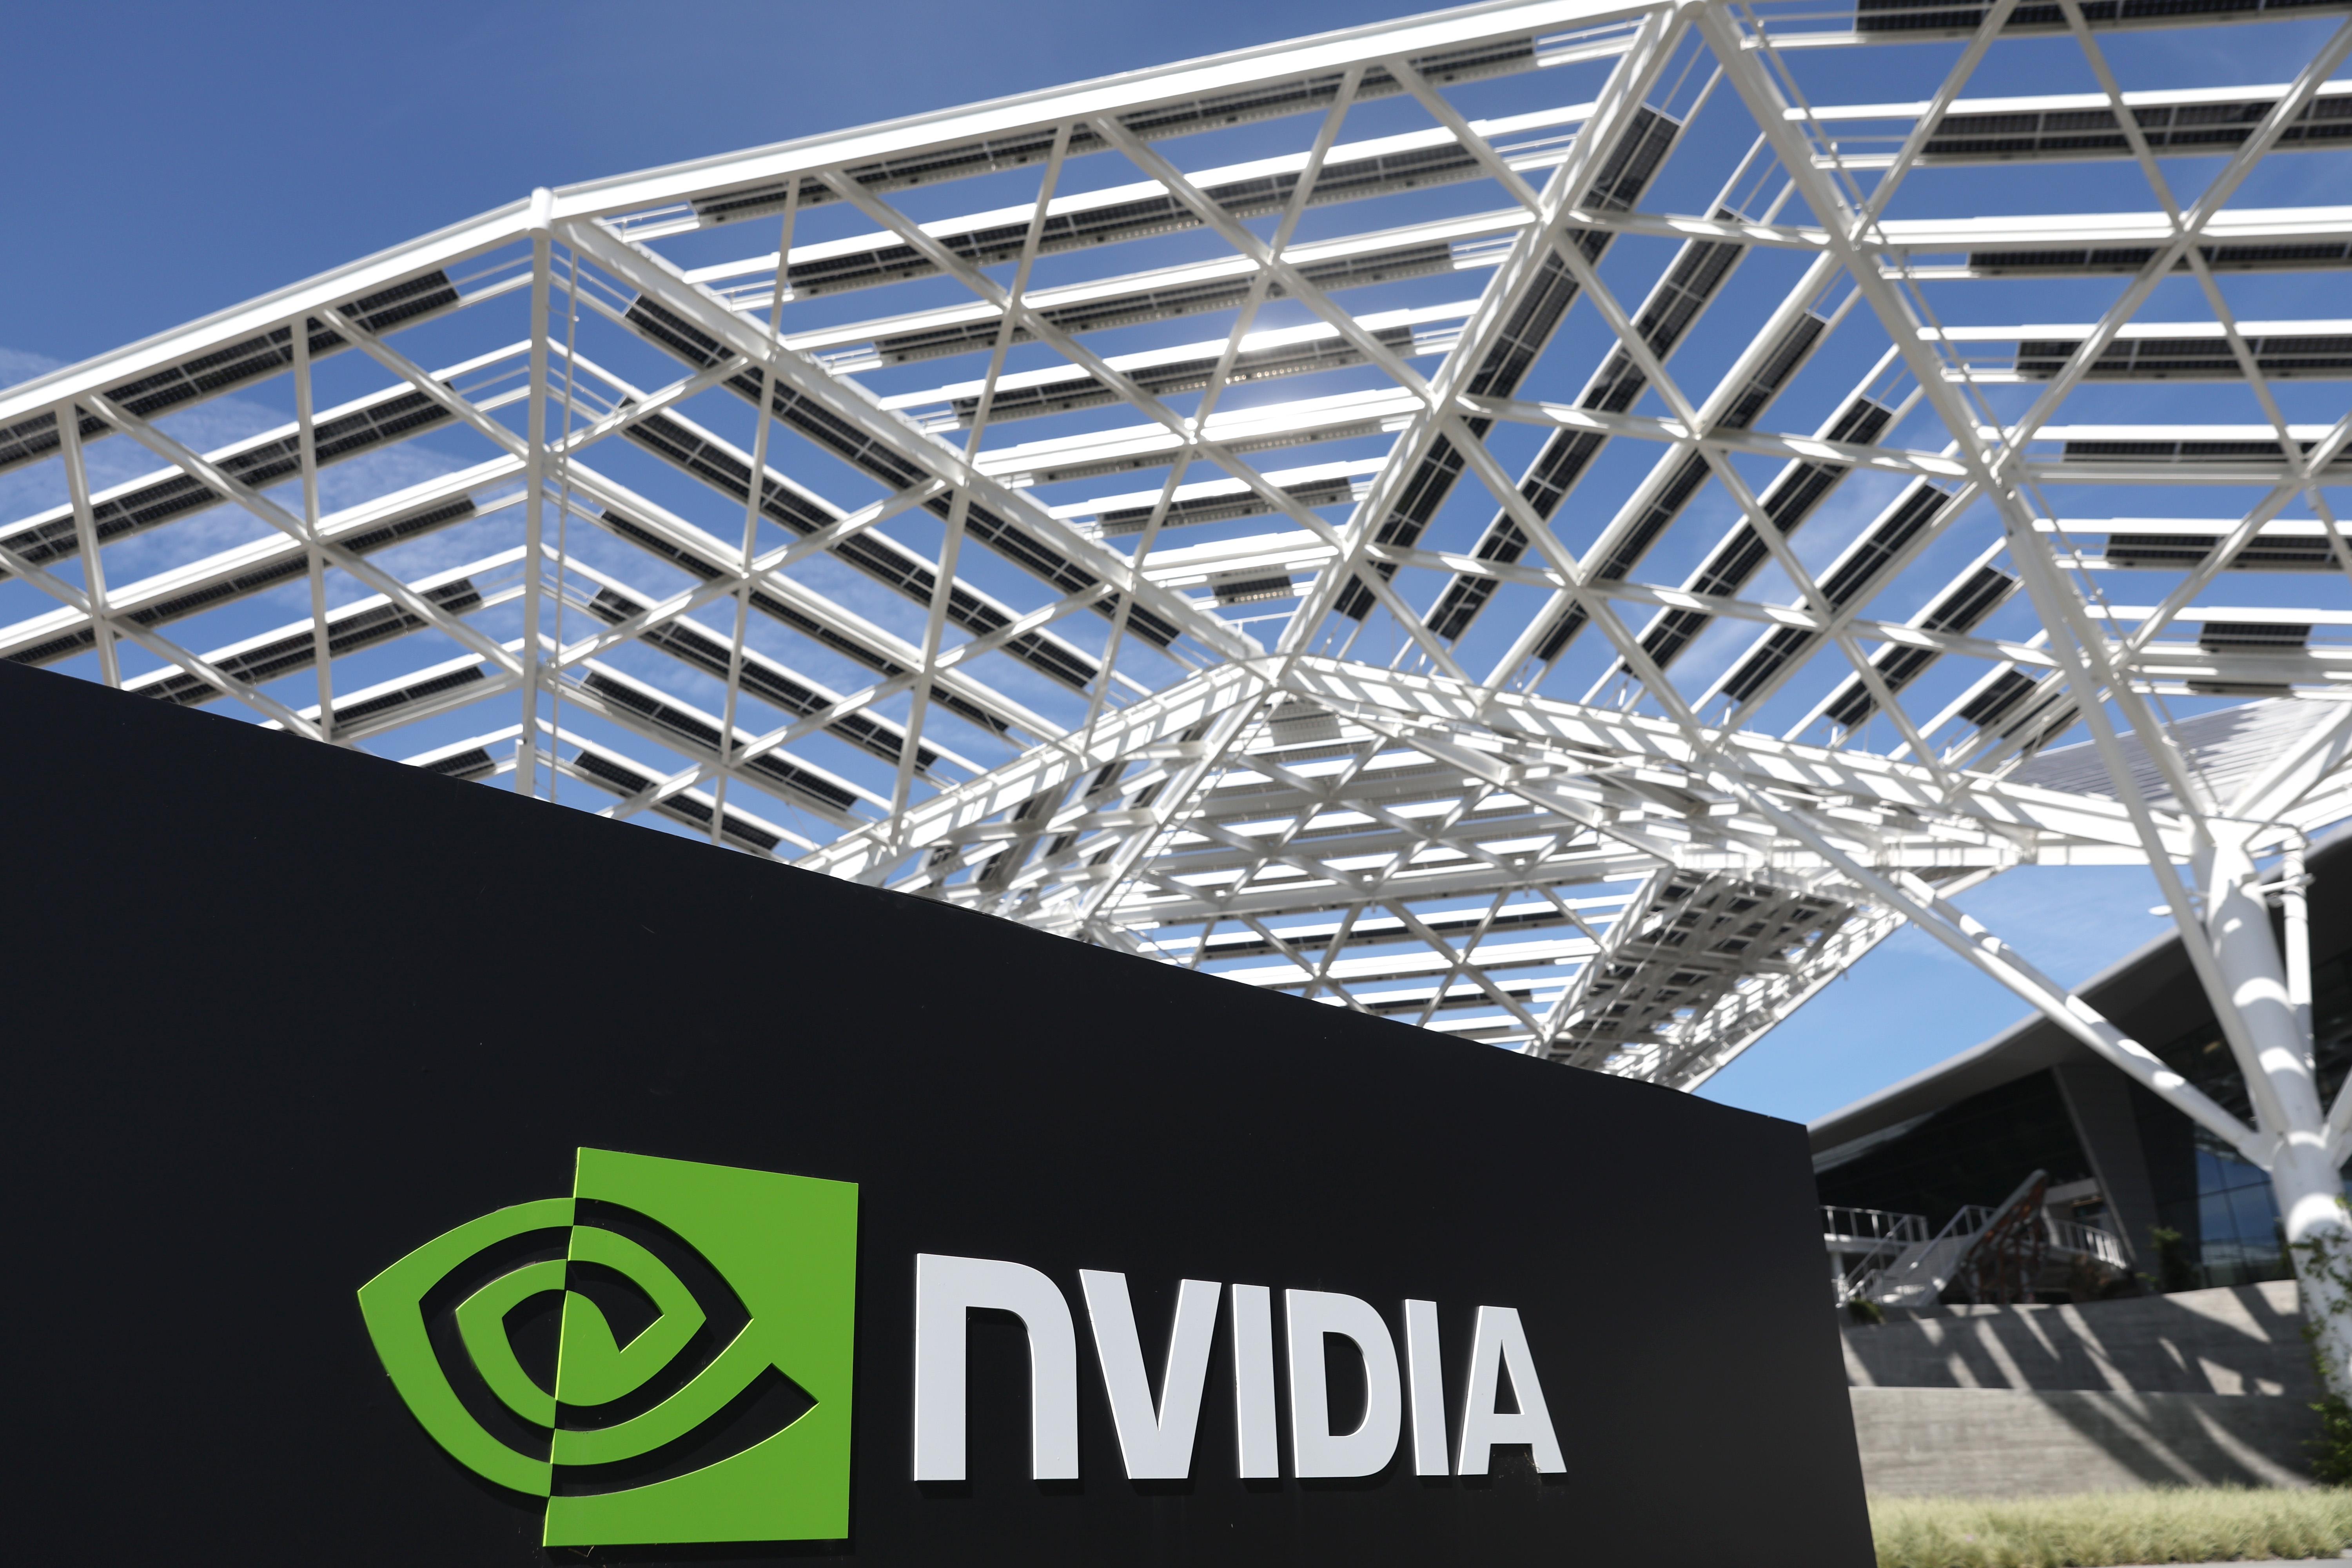 A black sign at the Nvidia headquarters, which says the company name in white and shows the company logo, a green swirl in the shape of an eye. 